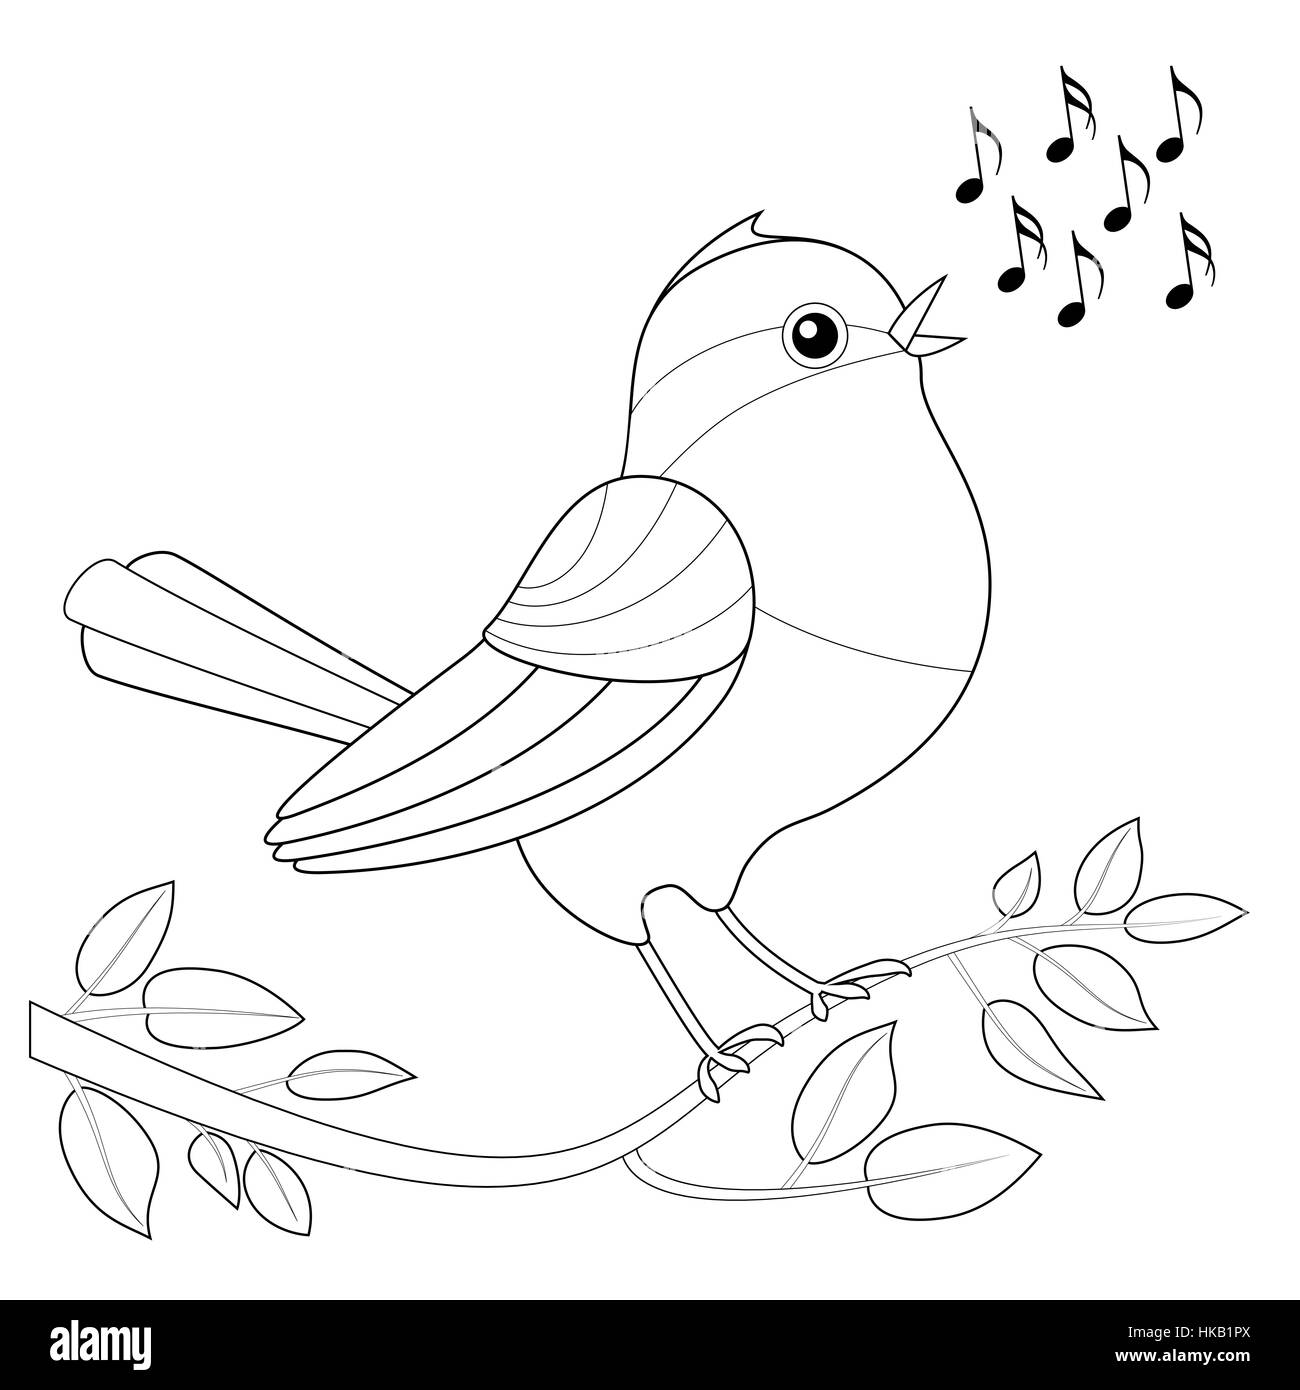 Songbird coloring picture - singing bird with notes waiting to be colored. Stock Photo